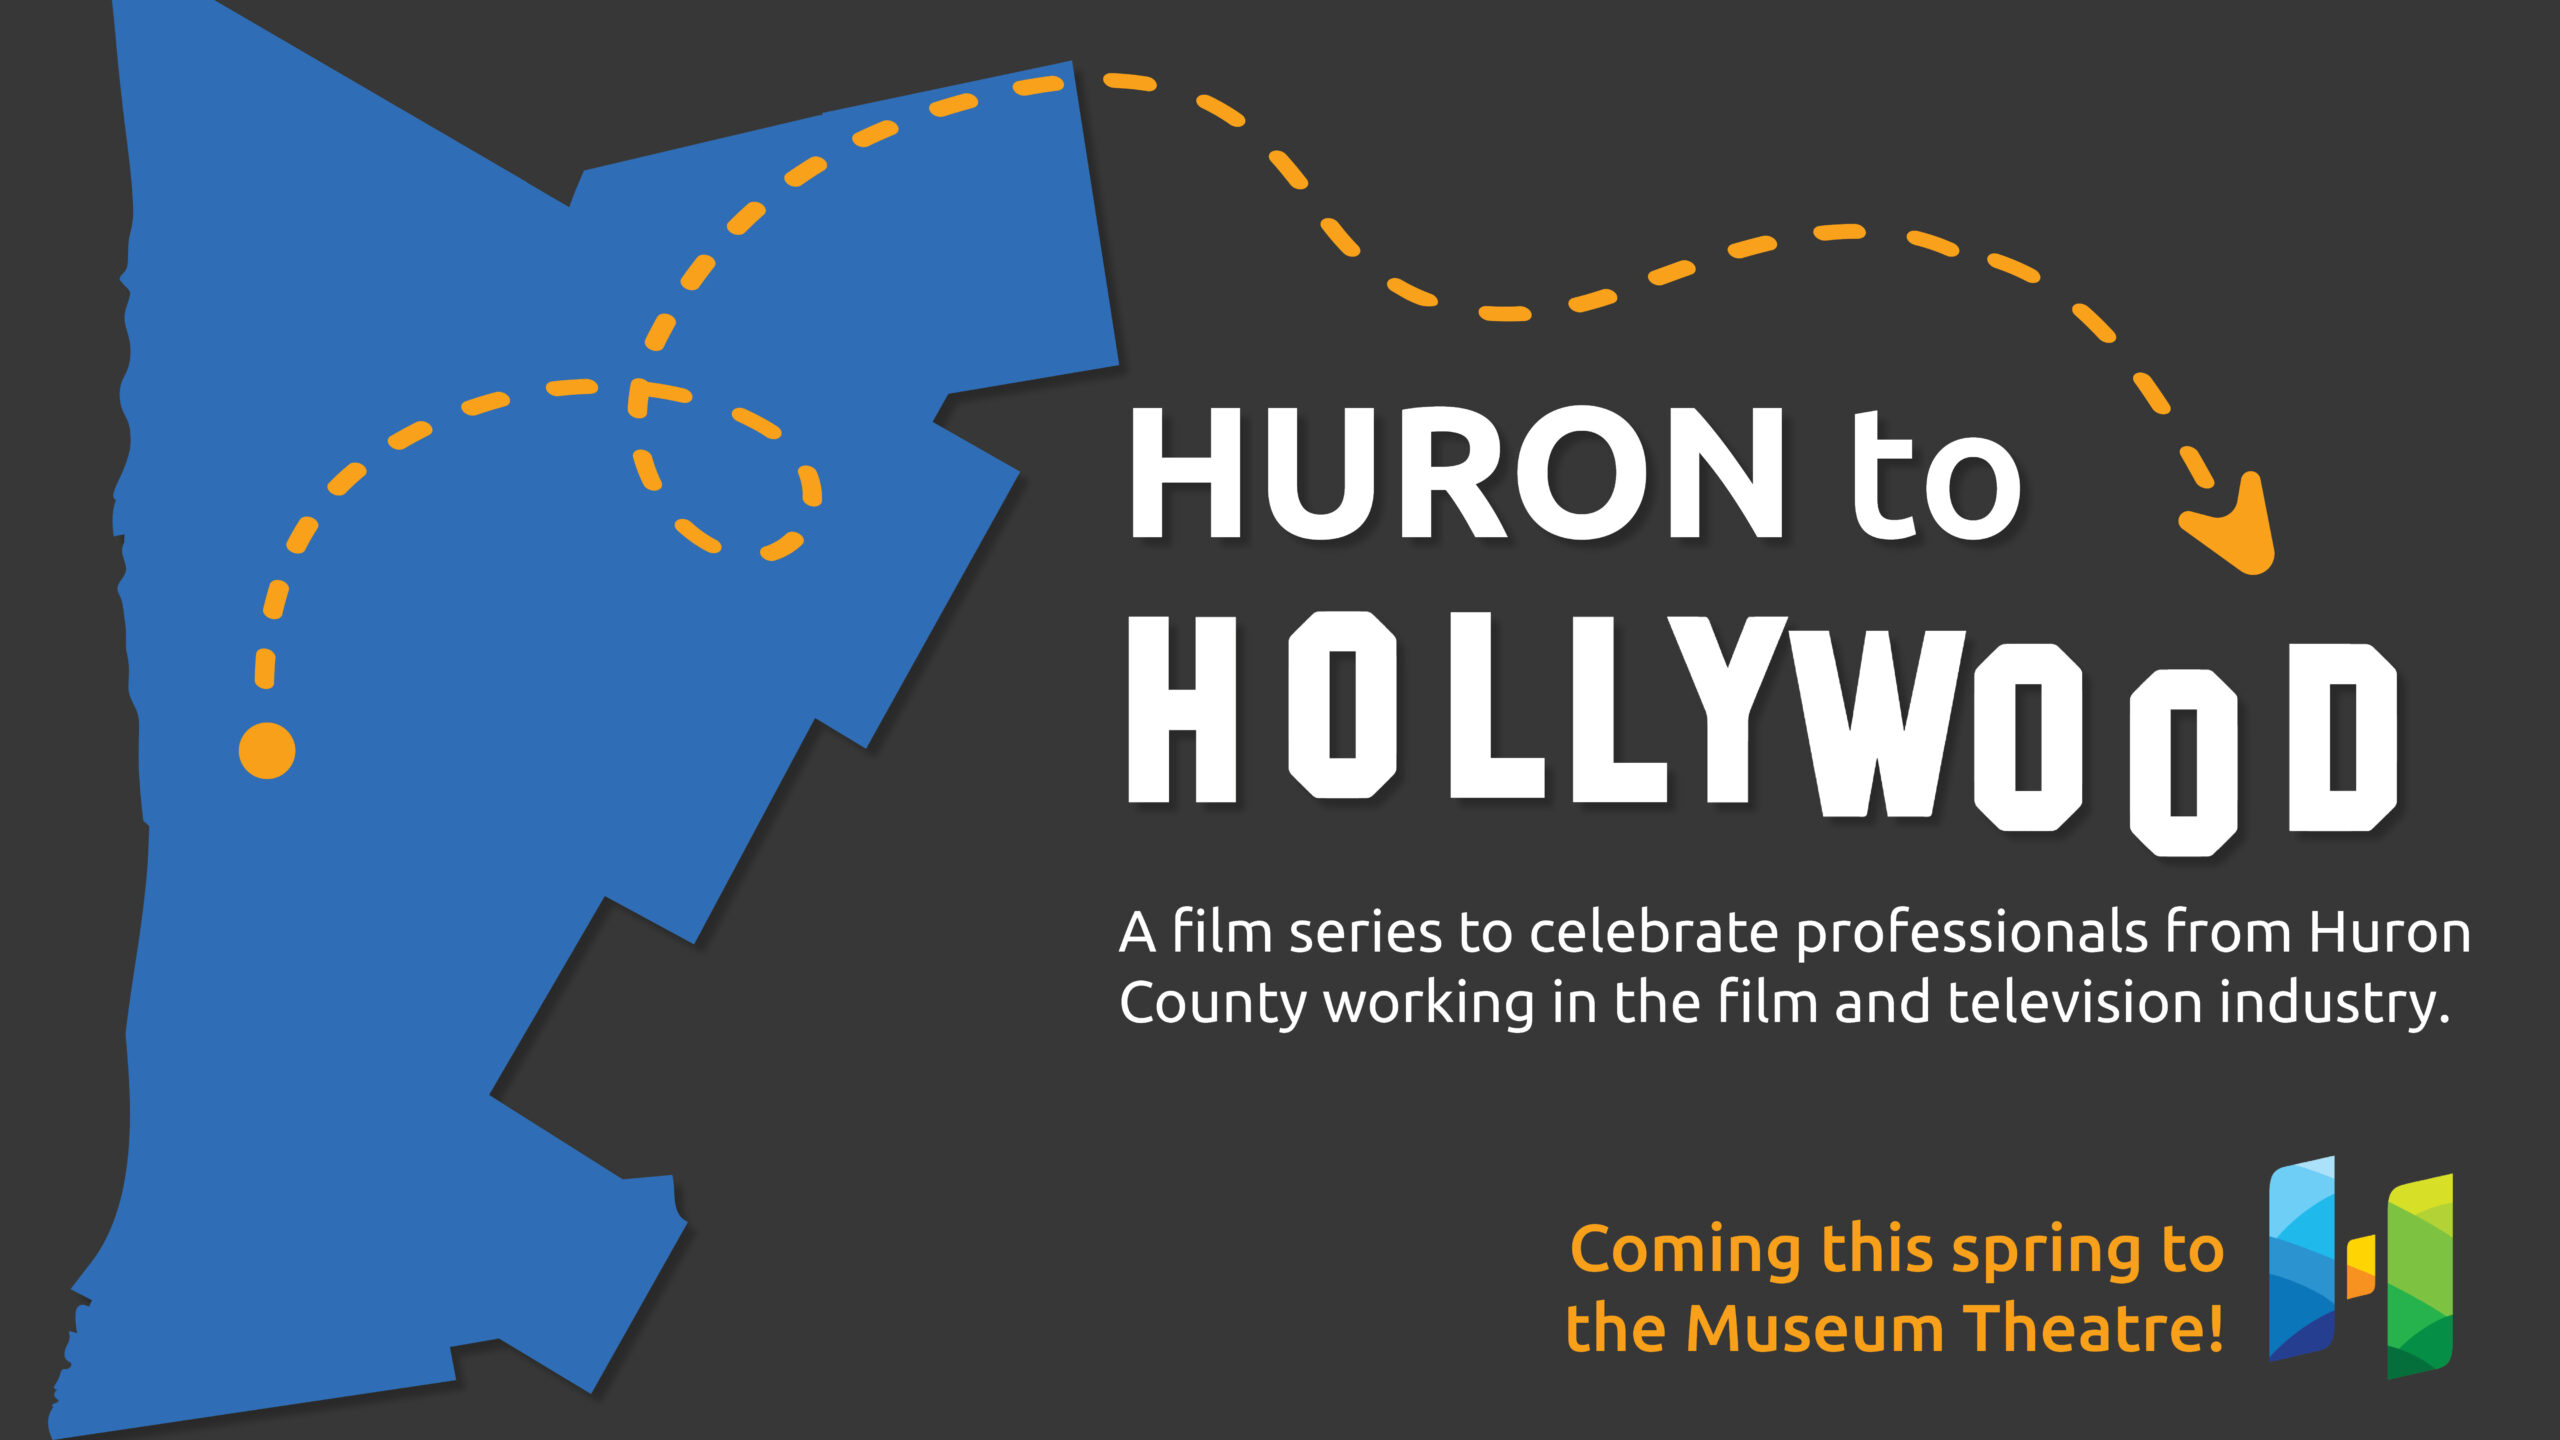 Illustration of the County of Huron with text promoting Huron to Hollywood film series